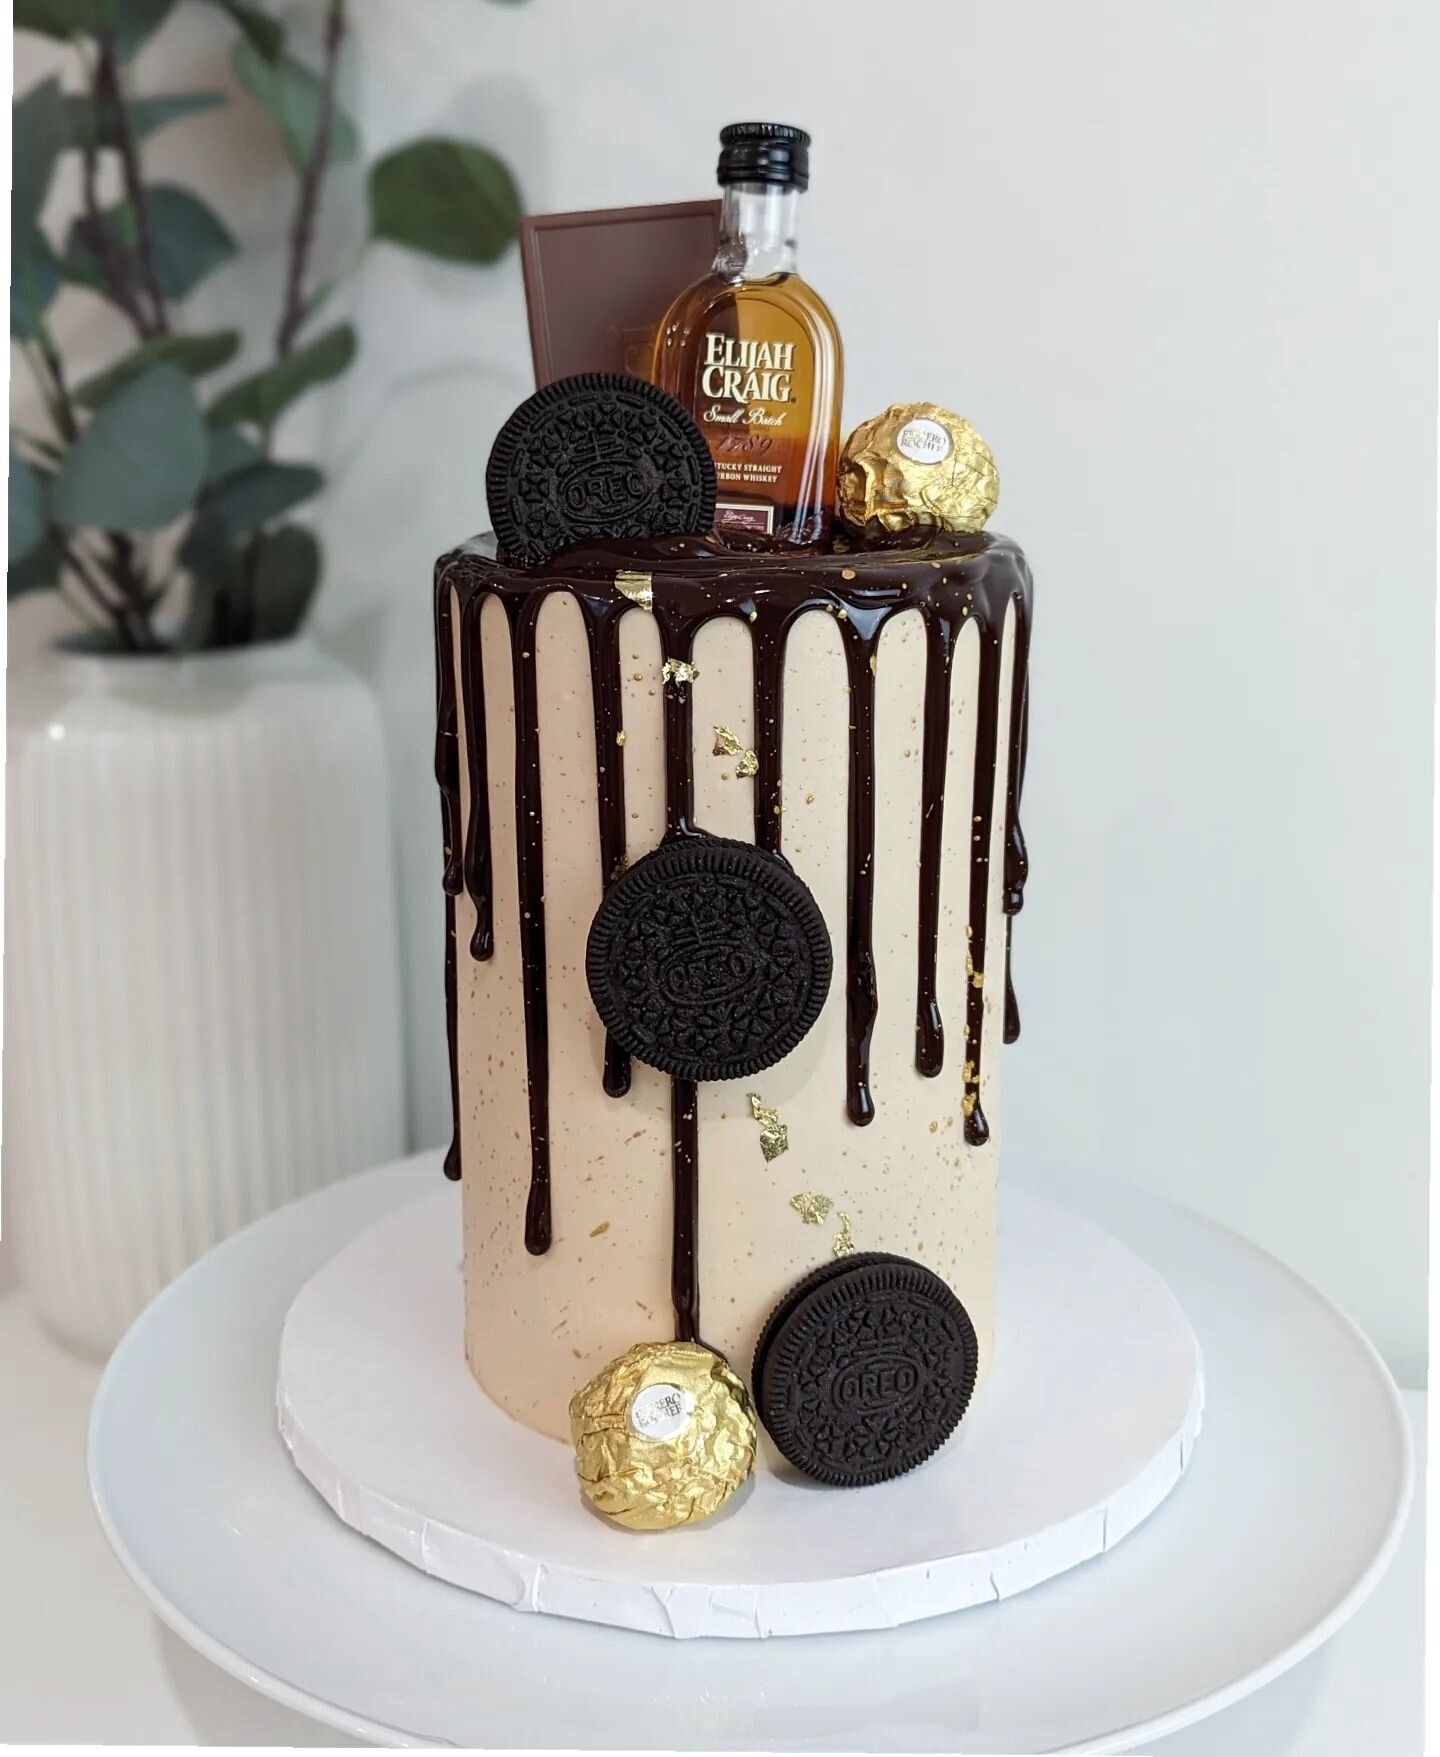 Indulgence ✨ tall layers of yummy butterscotch cake with a dark and shiny chocolate drip! I love this style of cake, it's always such a stunning presentation with all kinds of elements and textures to enjoy! It's super fun to make too, always so happ